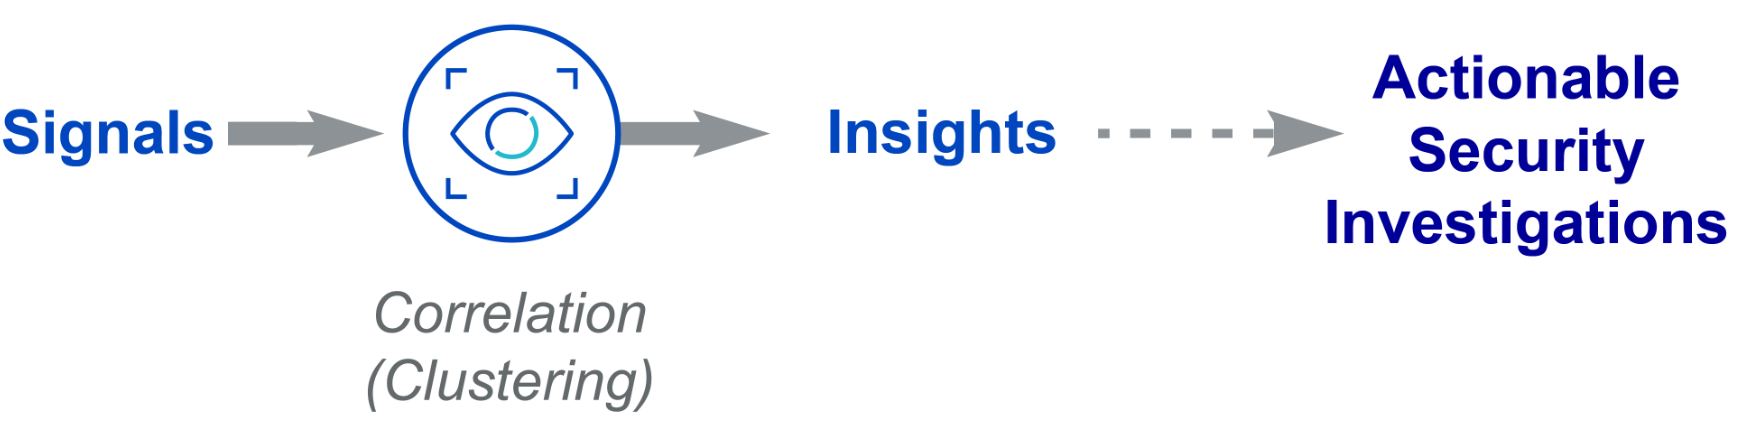 Signals to insights